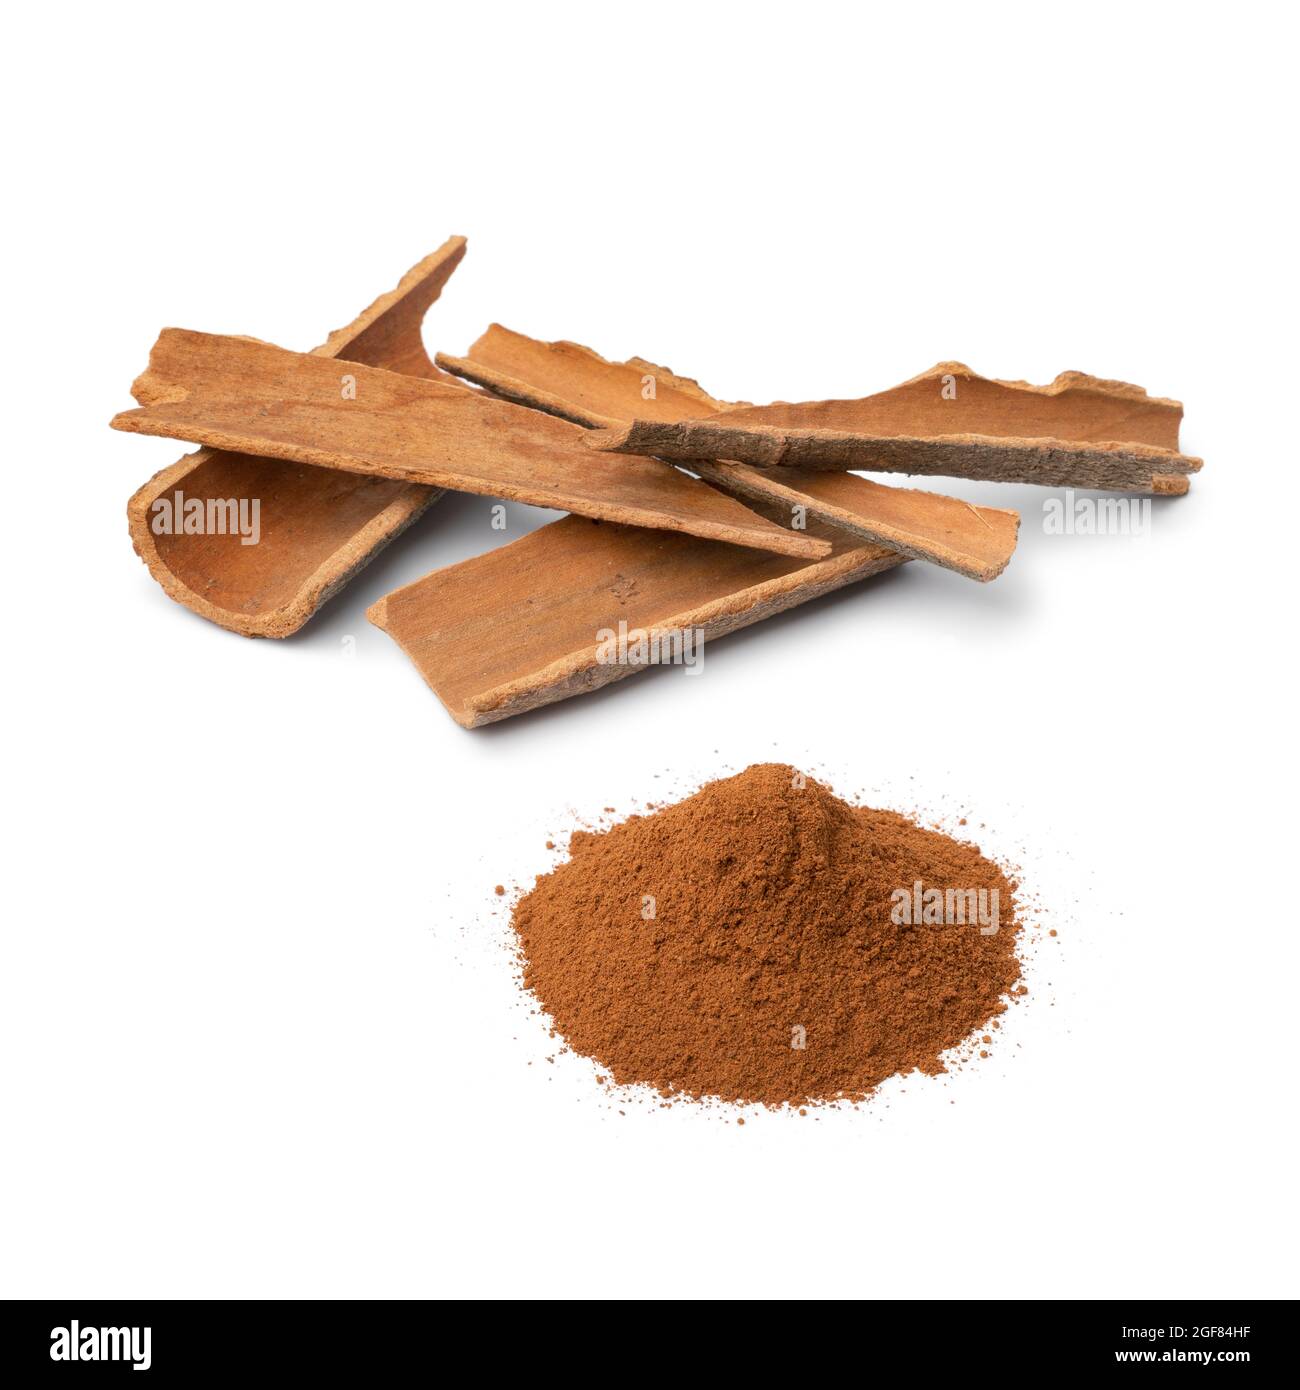 Dried Cinnamon bark and a heap of ground cinnamon powder isolated on white background Stock Photo